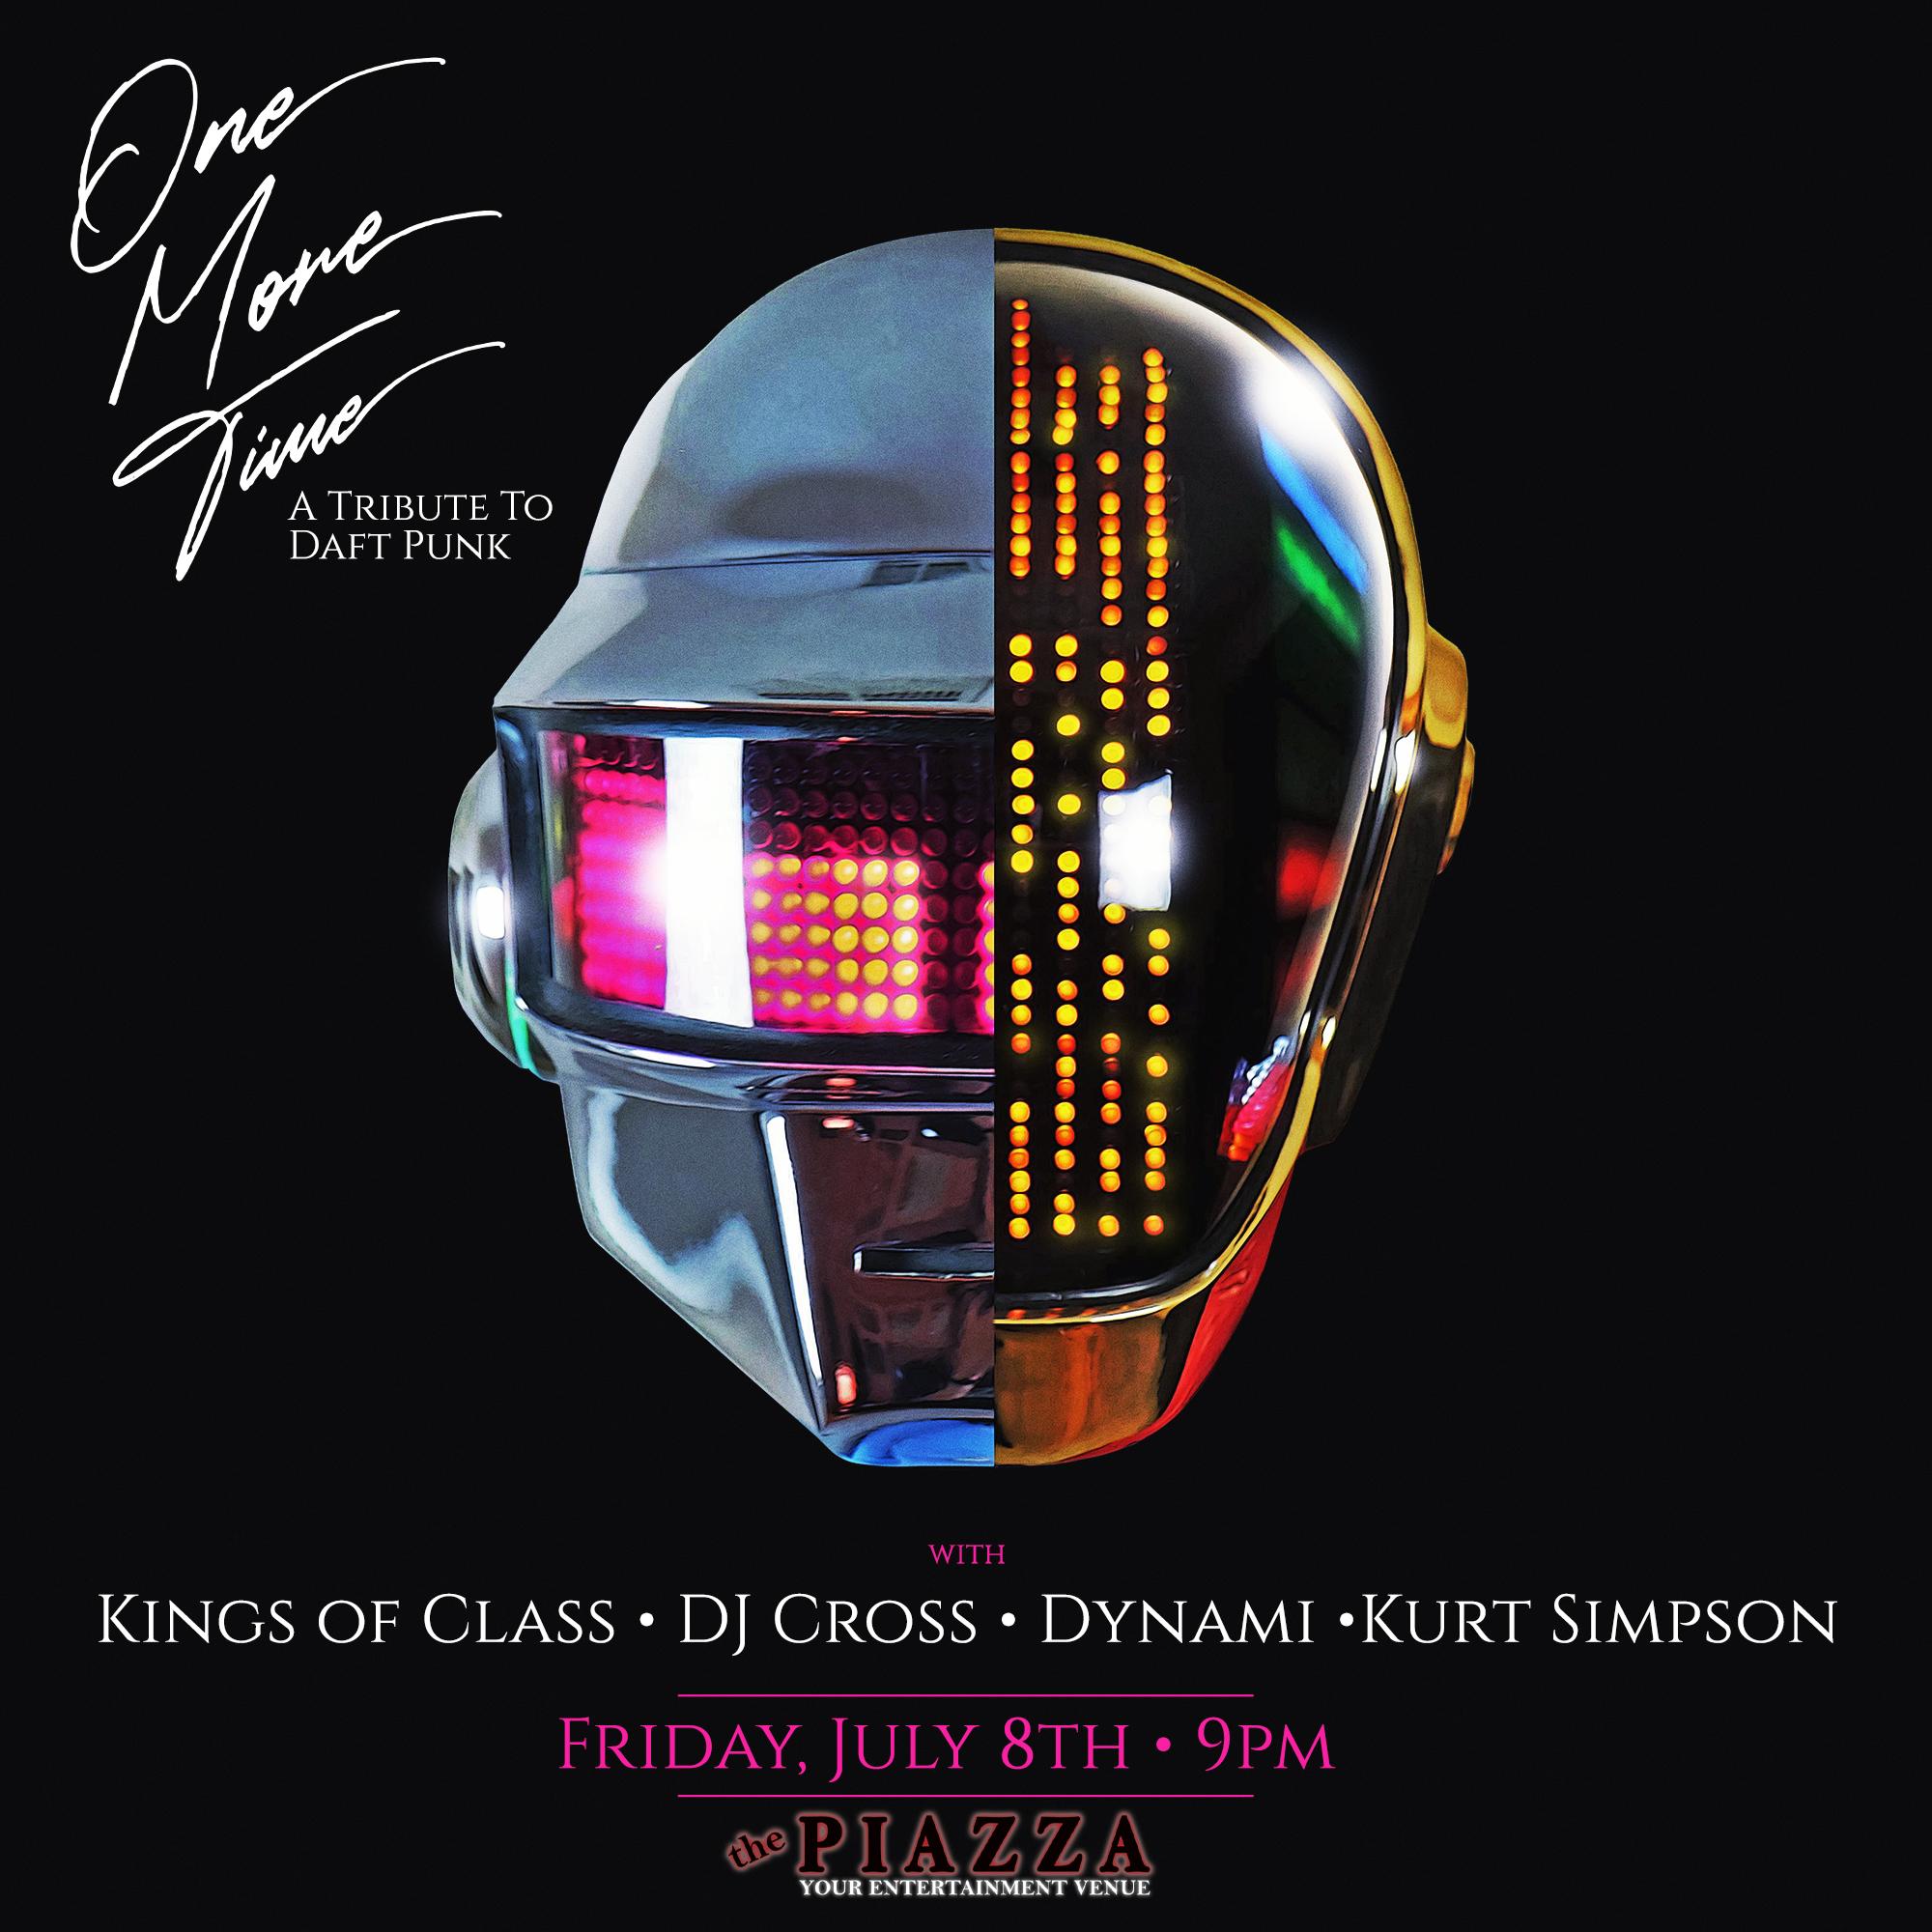 Buy Tickets to One More Time A Tribute to Daft Punk in Aurora on Jul